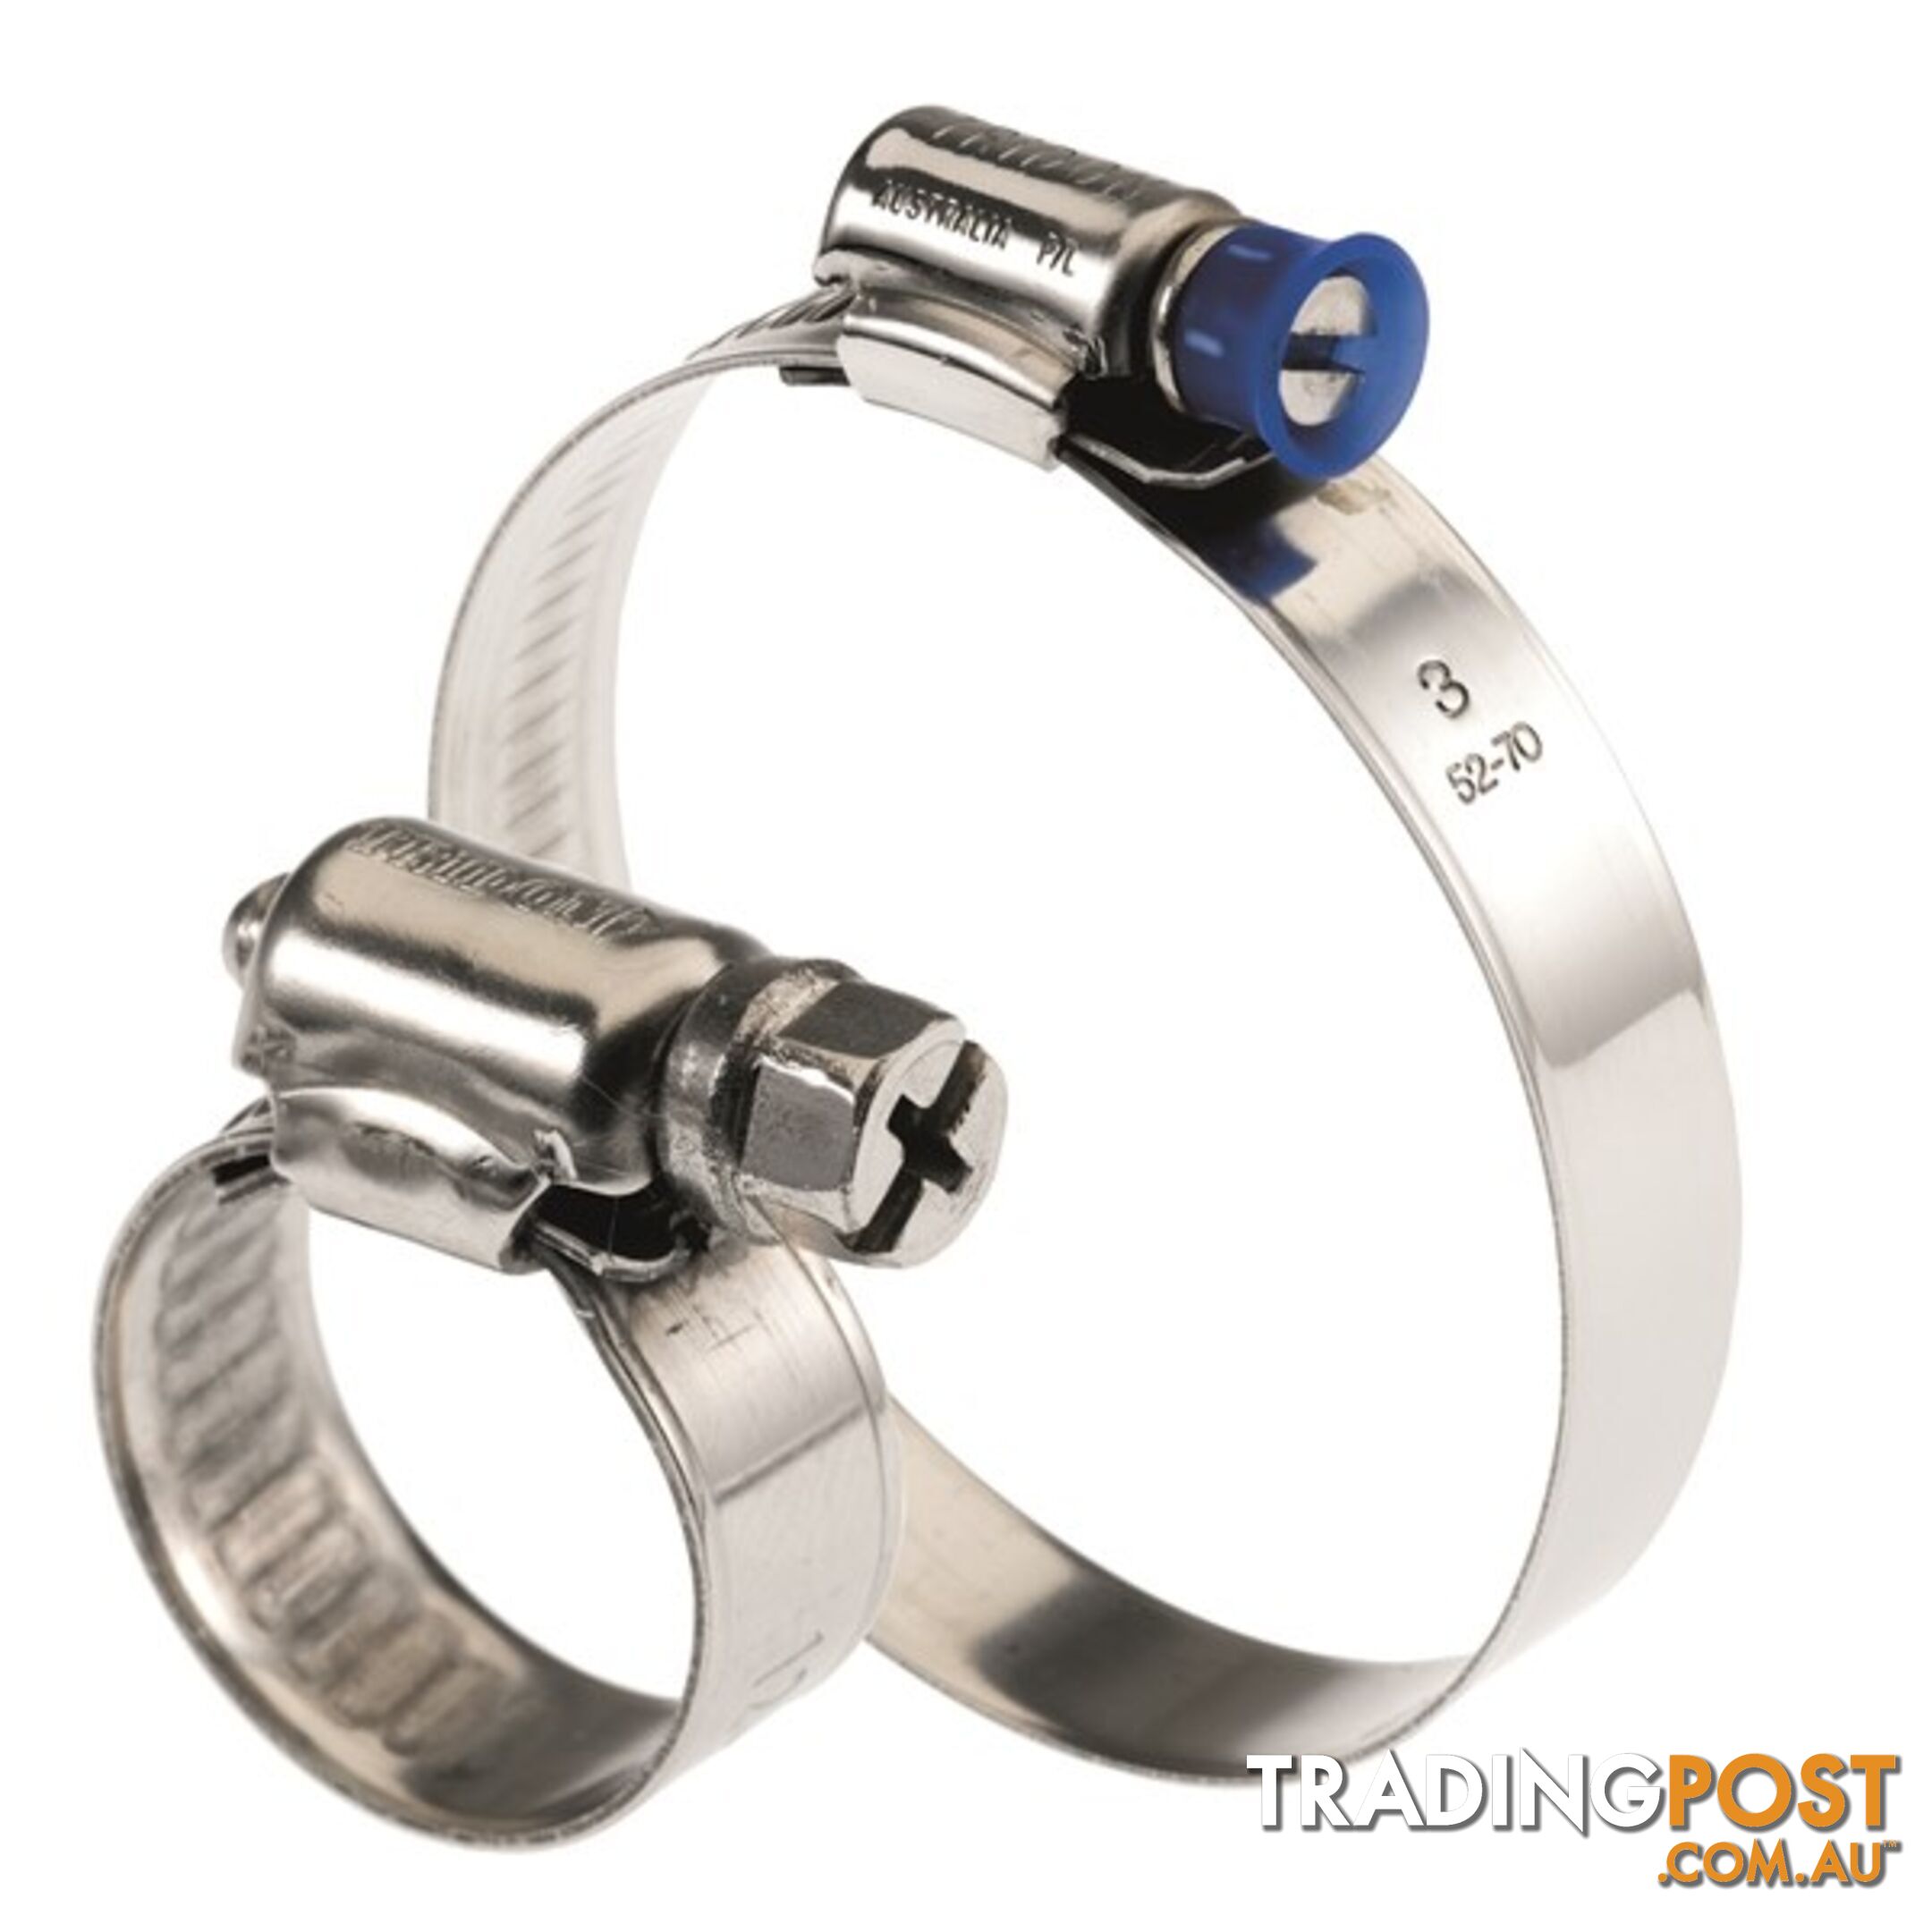 Tridon Hose Clamp 11 -16mm Solid Micro Band (8mm wide) Full S. Steel 10pk SKU - SMPM00P